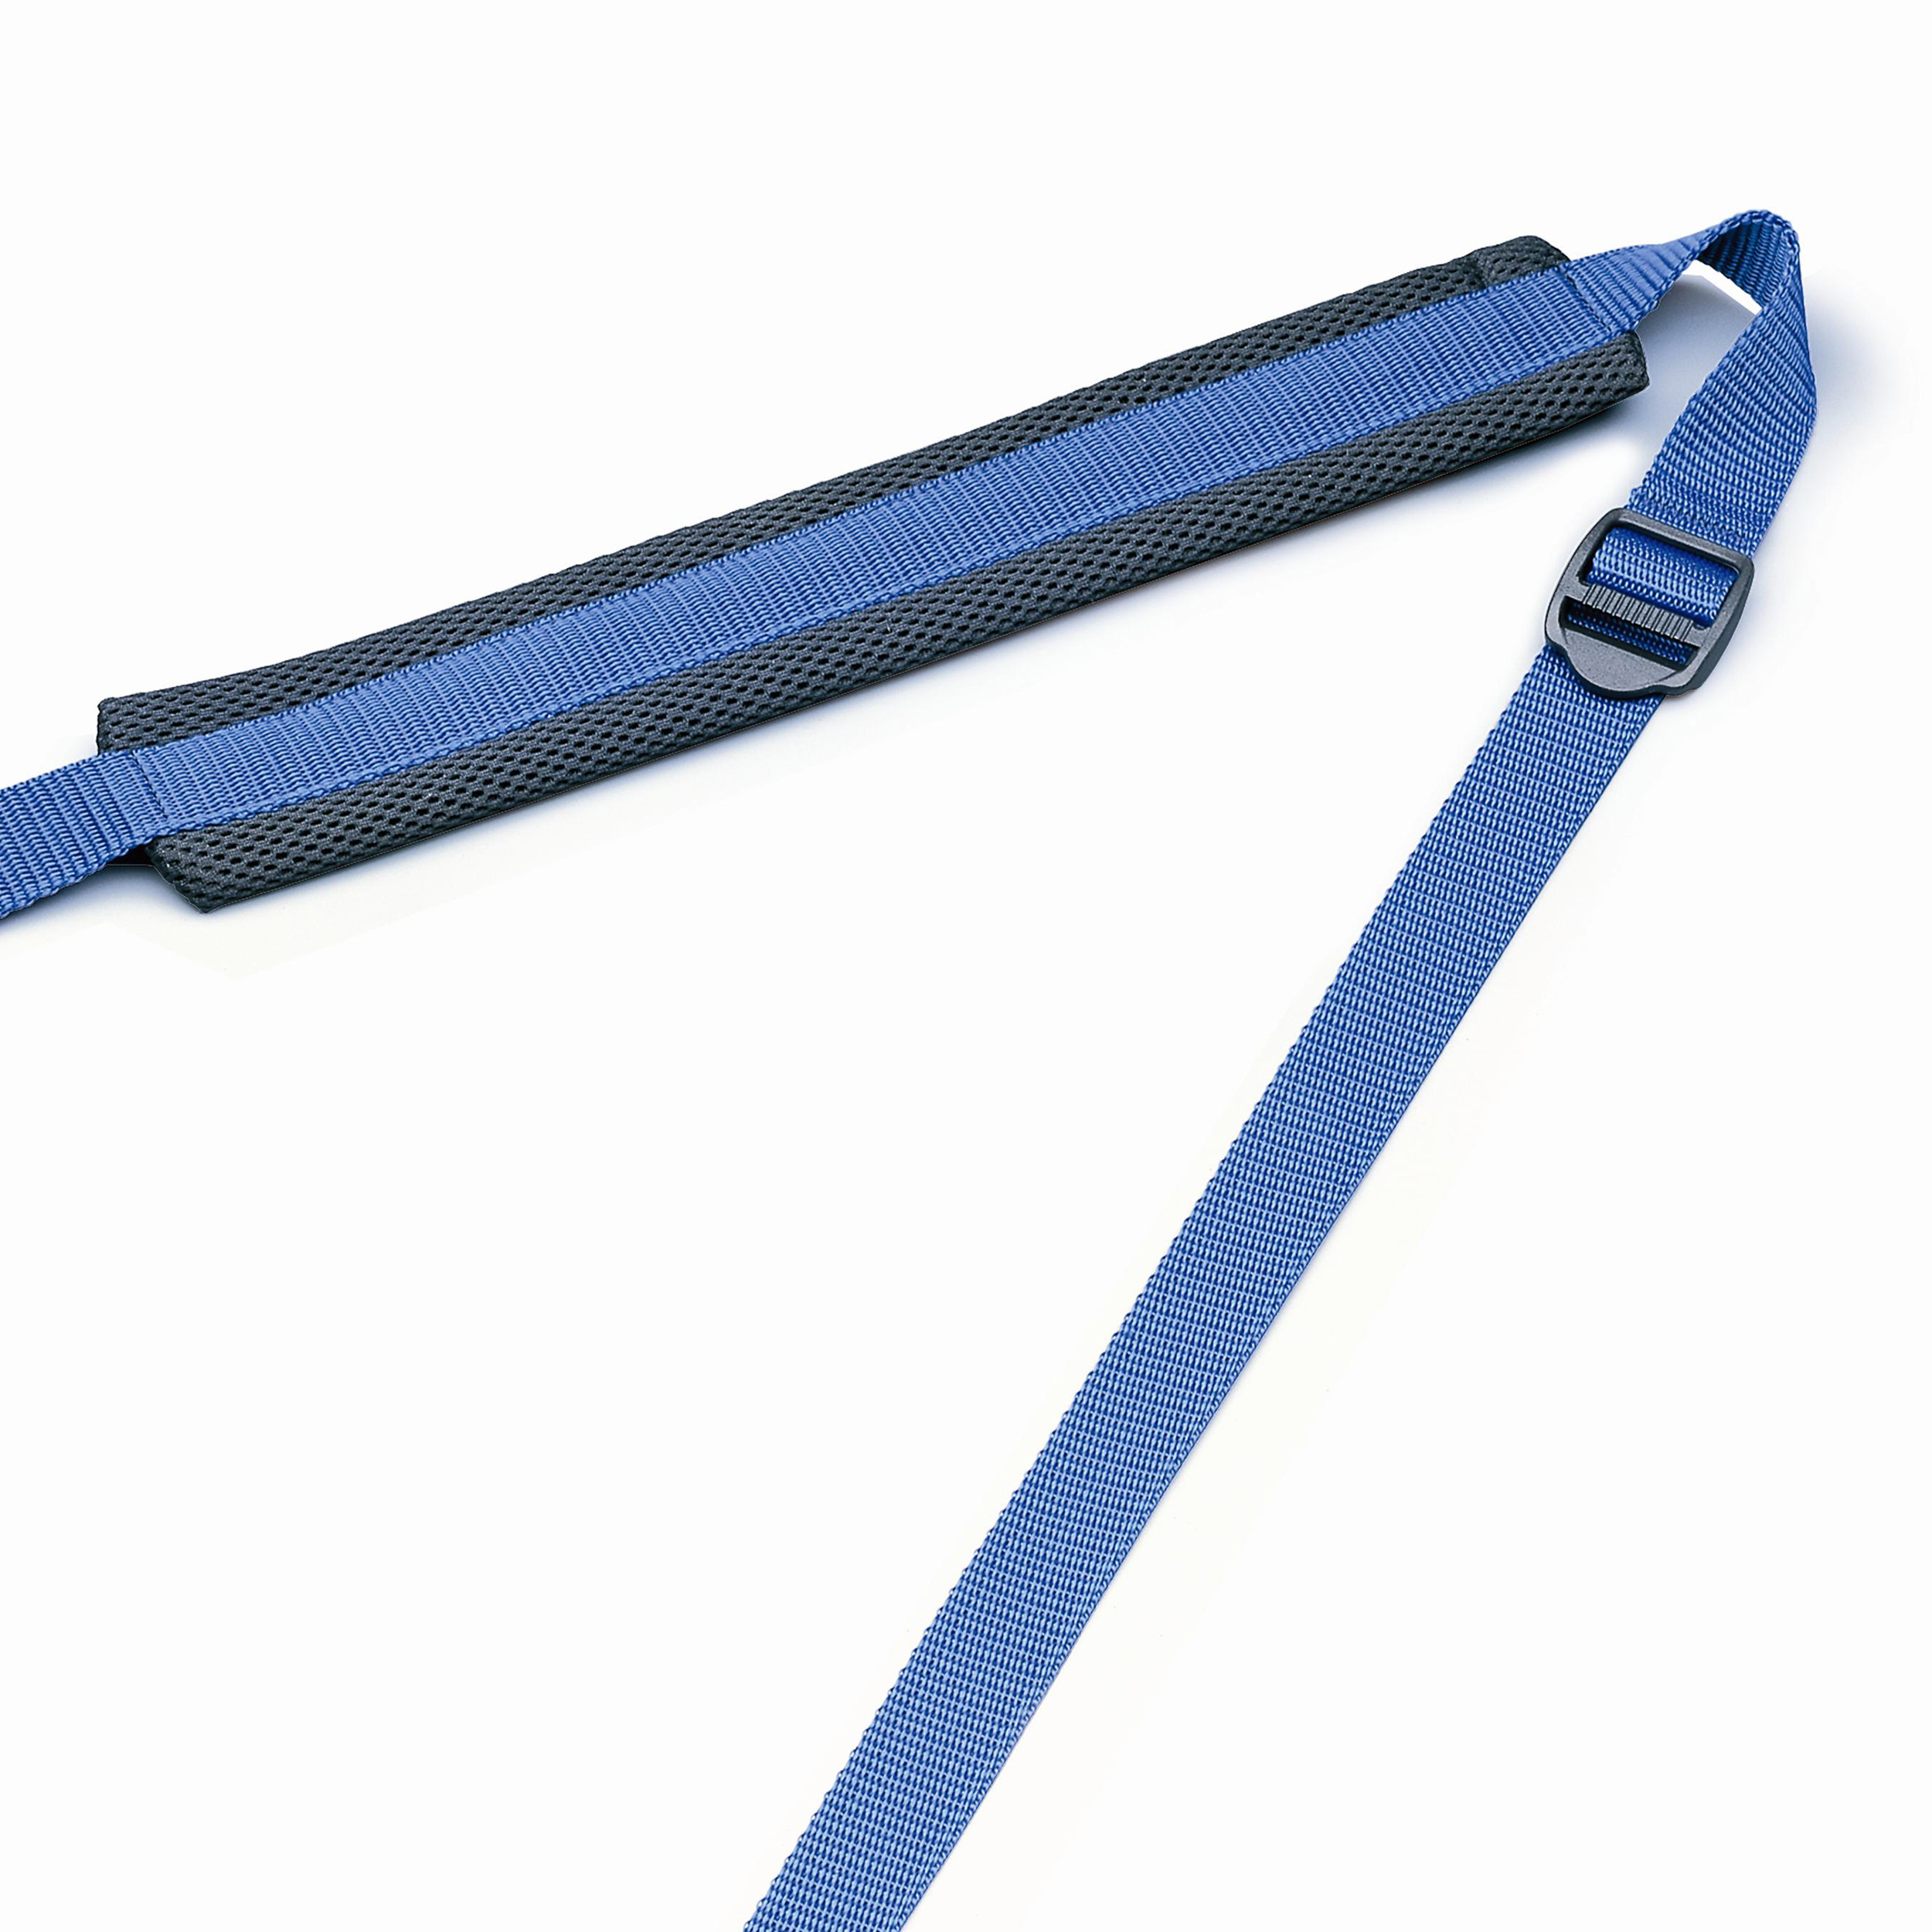 Carrying Strap Blue / Black